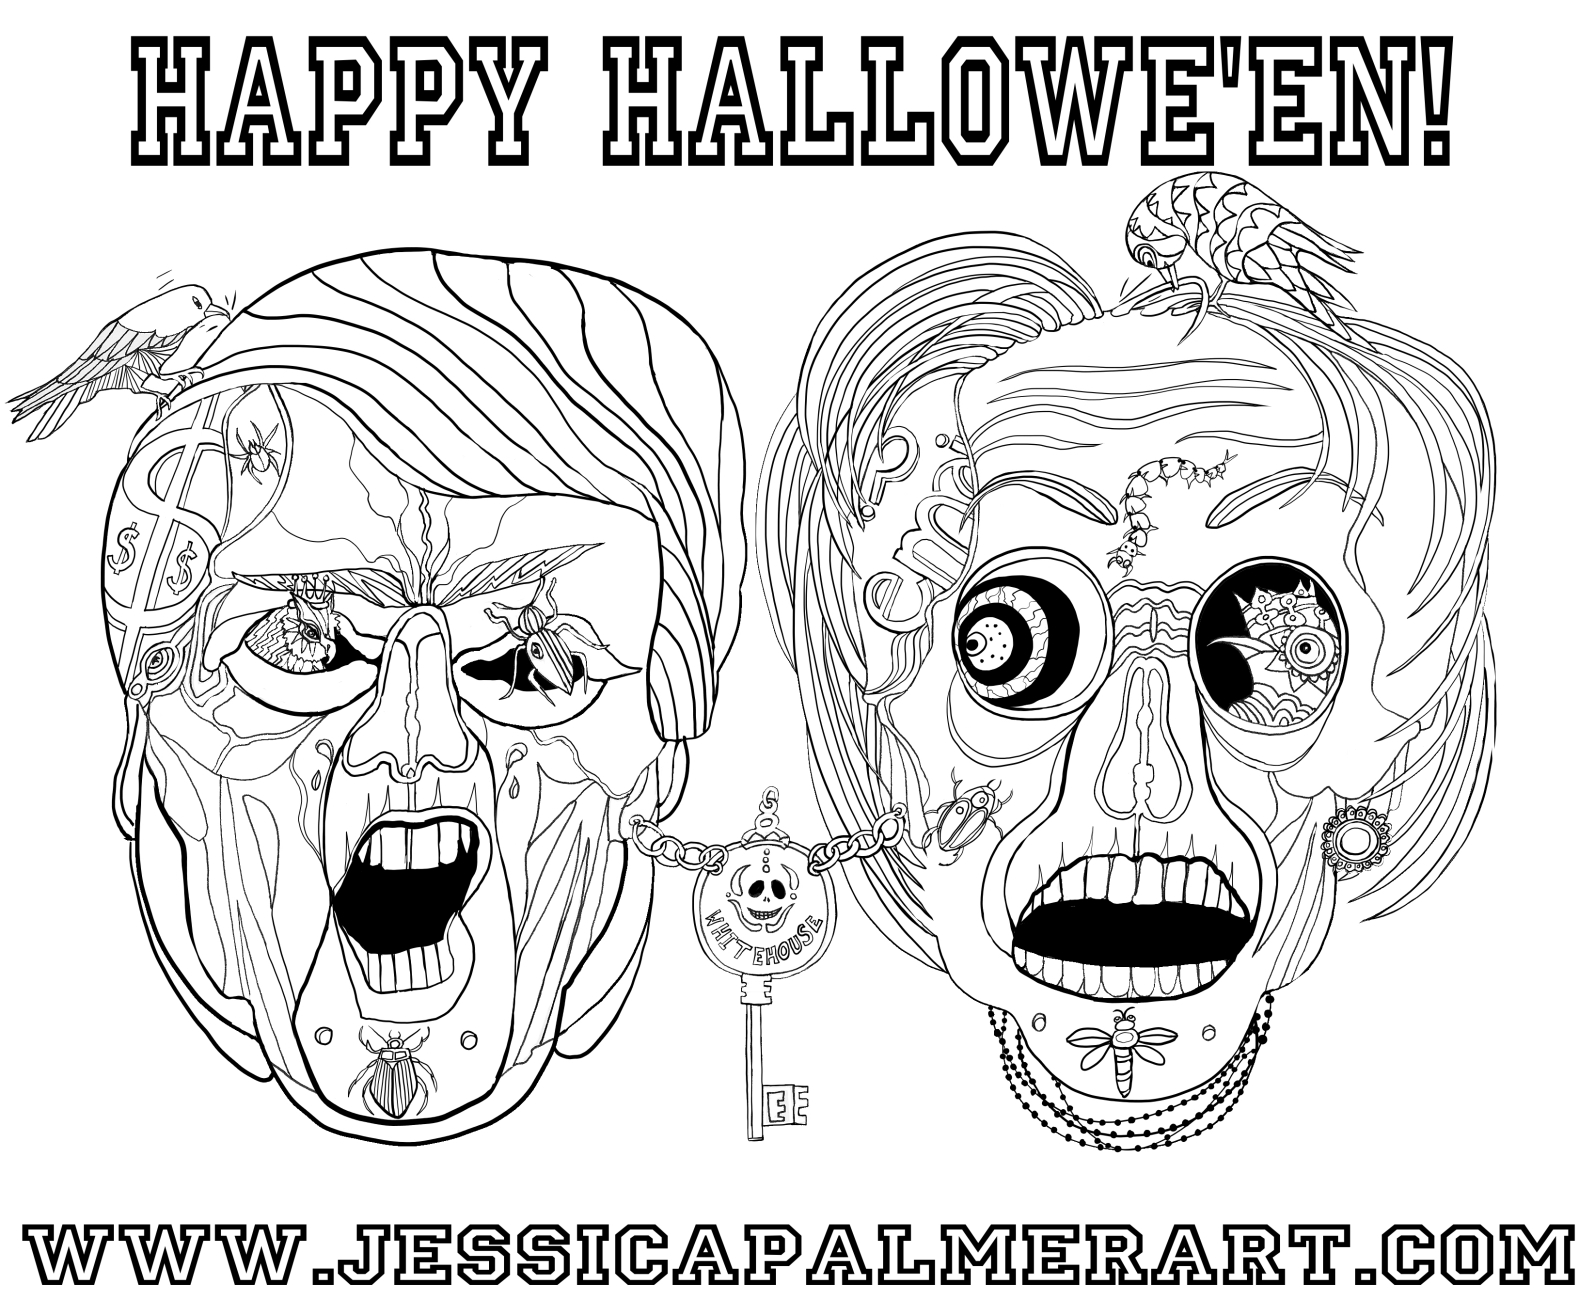 Halloween Election from Jessica Palmer